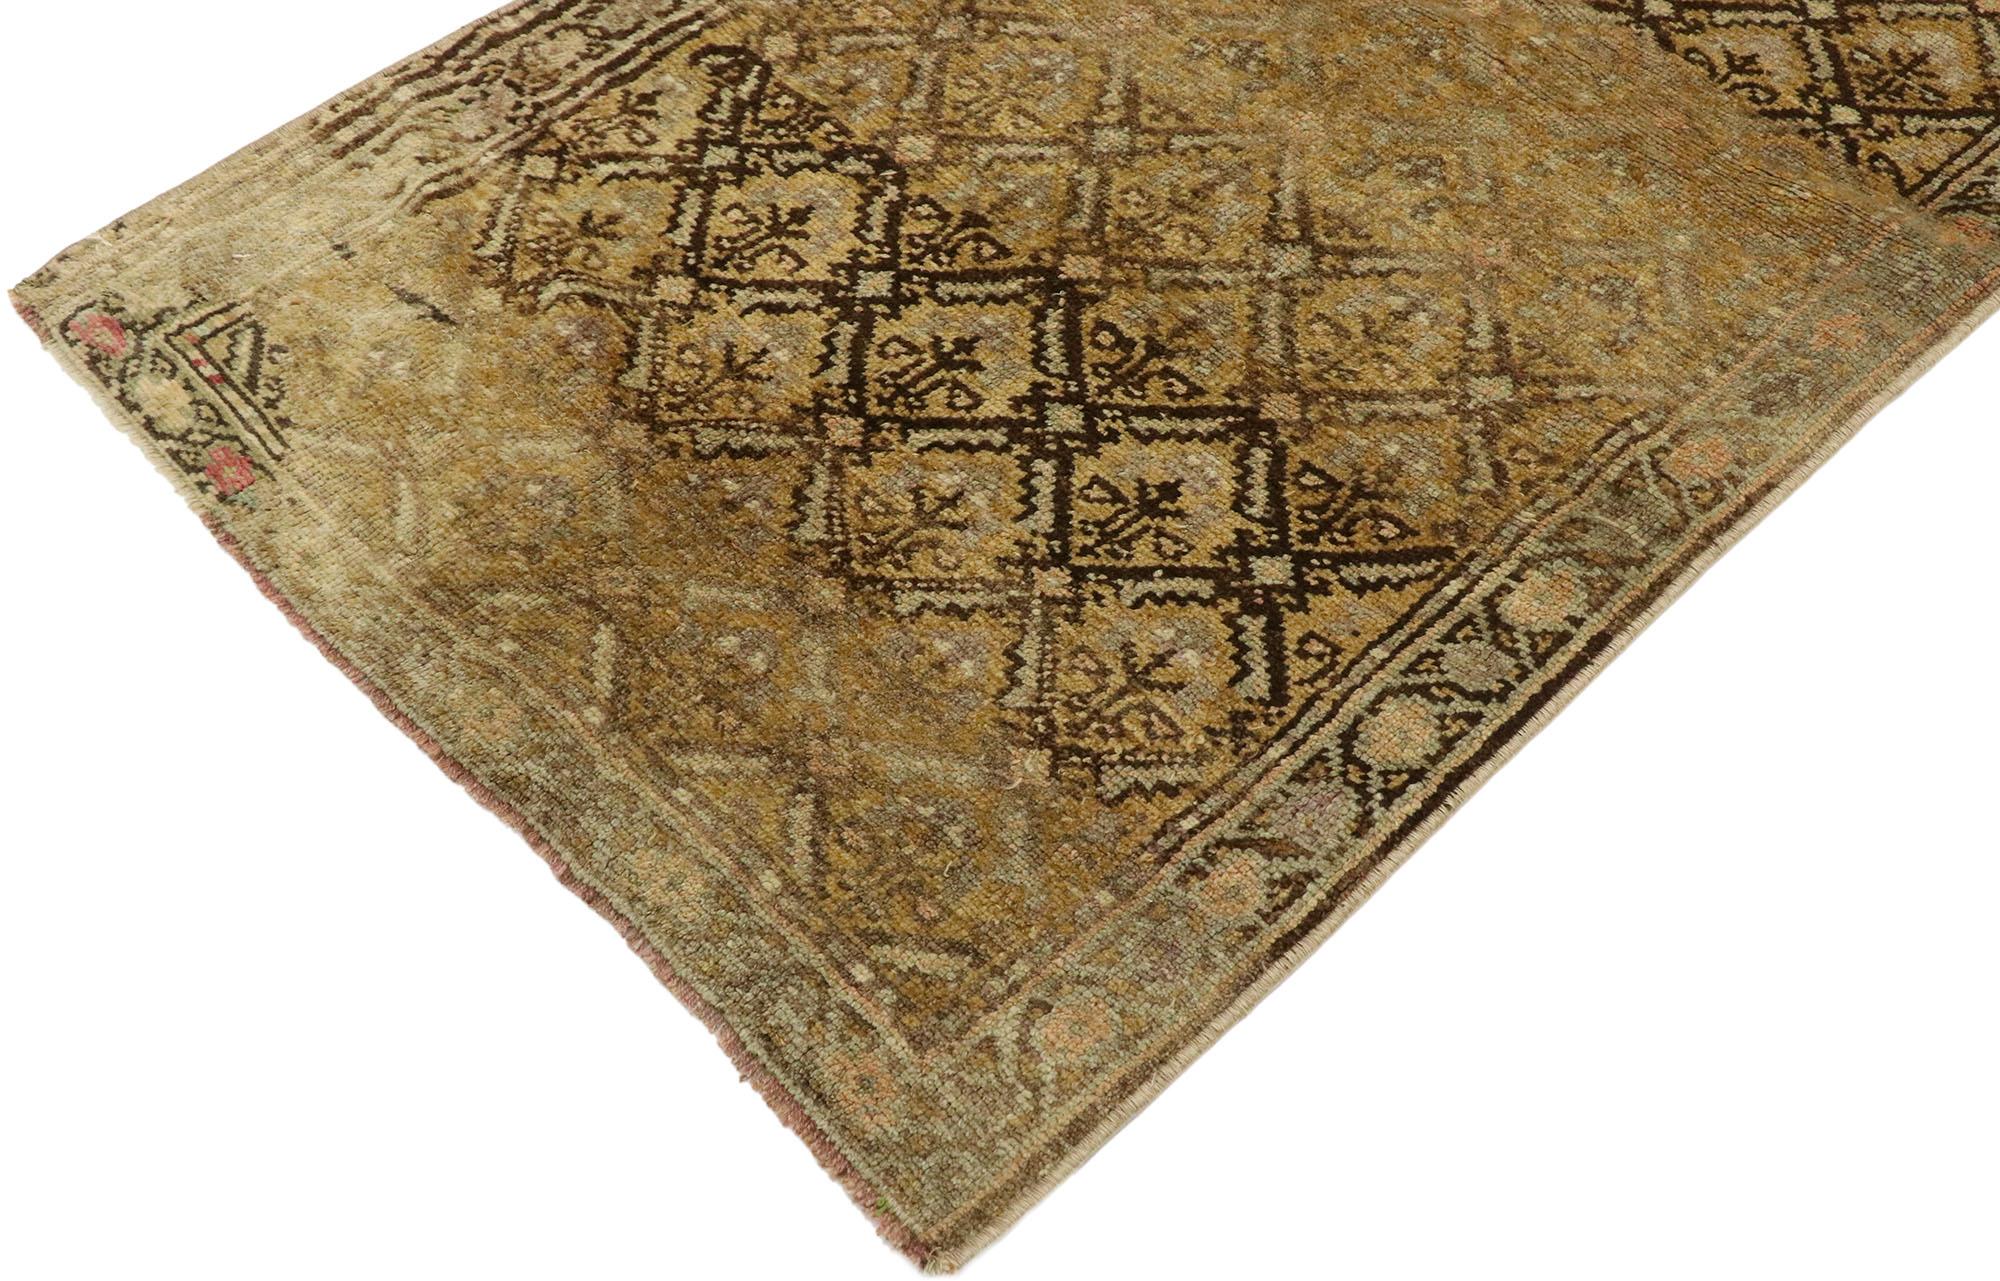 53097, vintage Turkish Oushak rug with Warm Shaker style. Warm and inviting, this hand knotted wool vintage Turkish Oushak rug charms with ease. The abrashed brown field features an all-over diamond botanical trellis design with stylized florals.